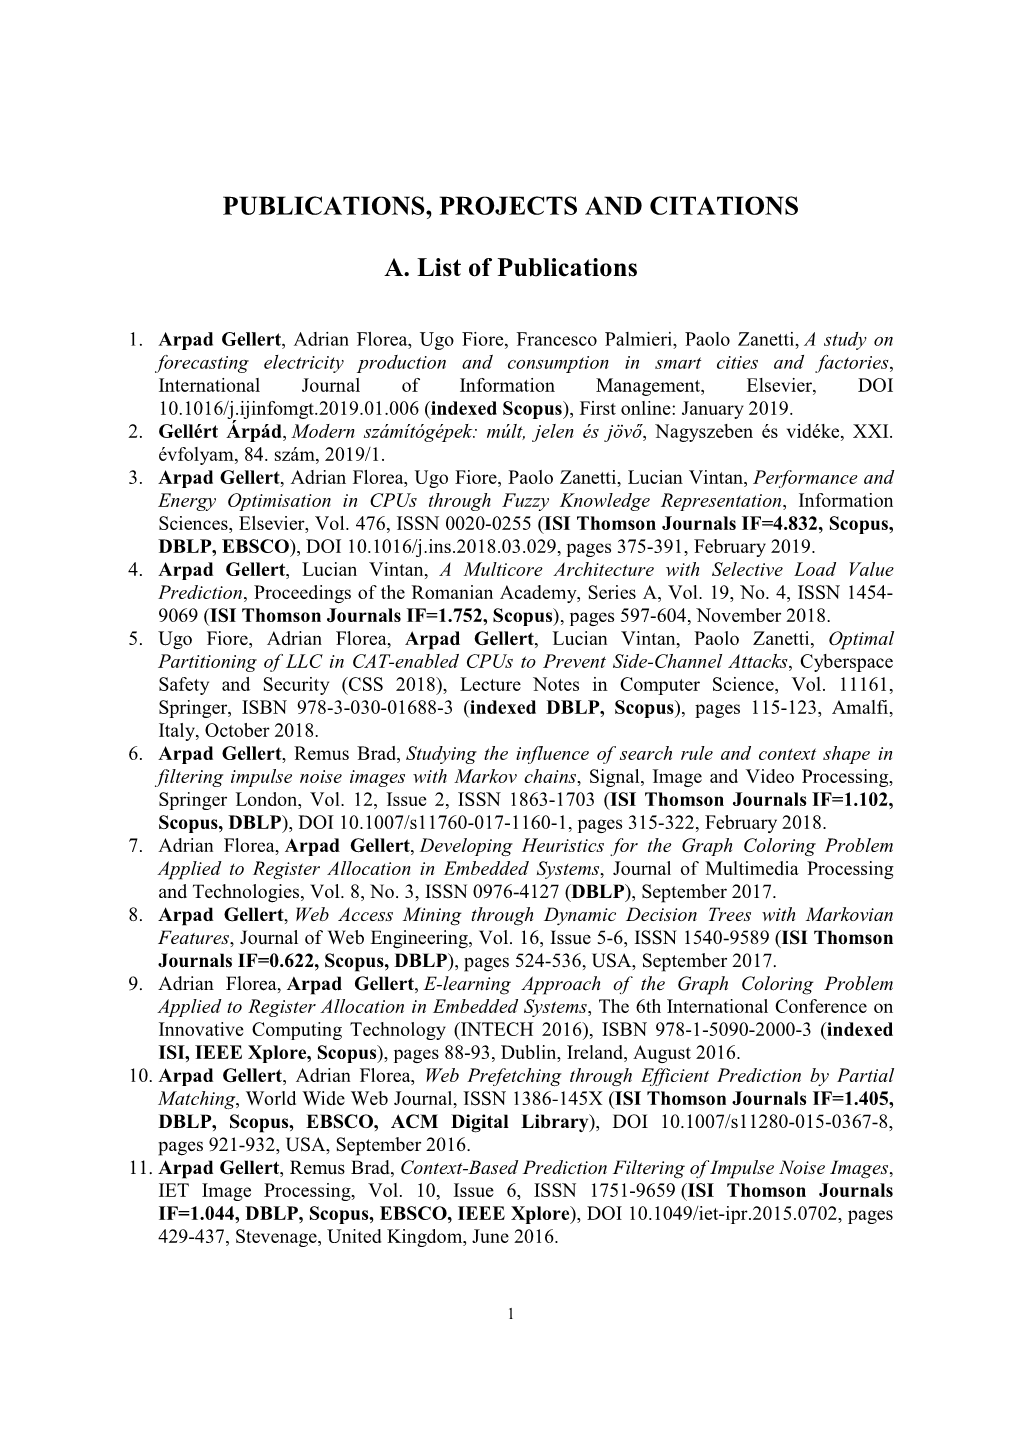 PUBLICATIONS, PROJECTS and CITATIONS A. List of Publications